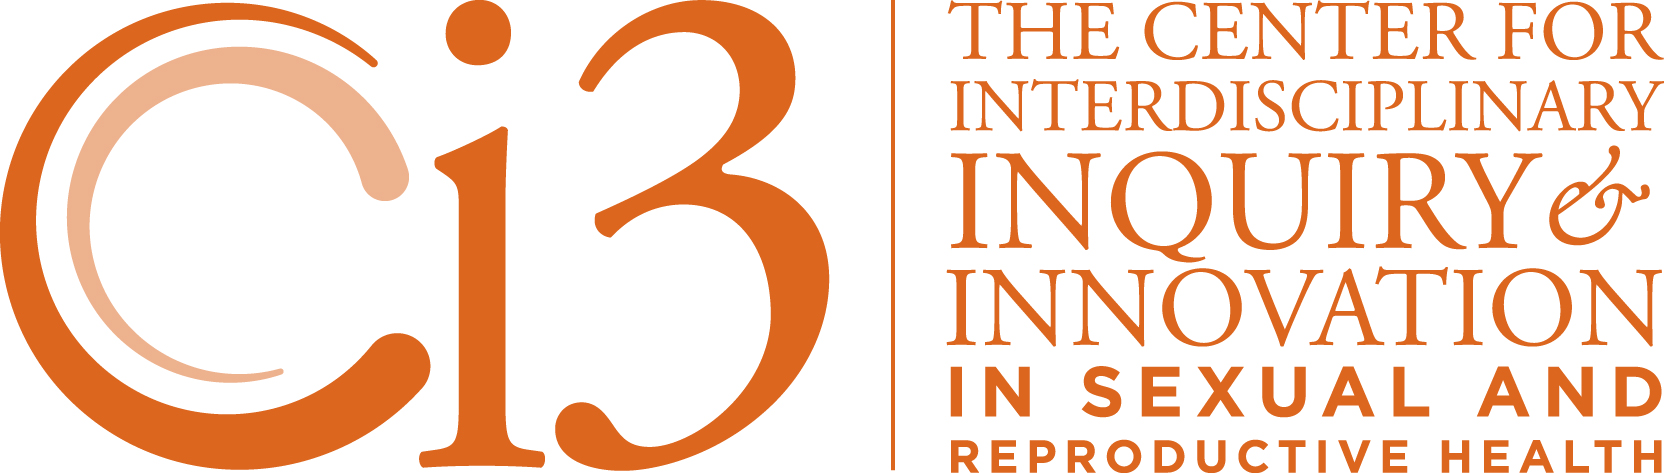 Center for Interdisciplinary, Inquiry, and Innovation in Sexual and Reproductive Health